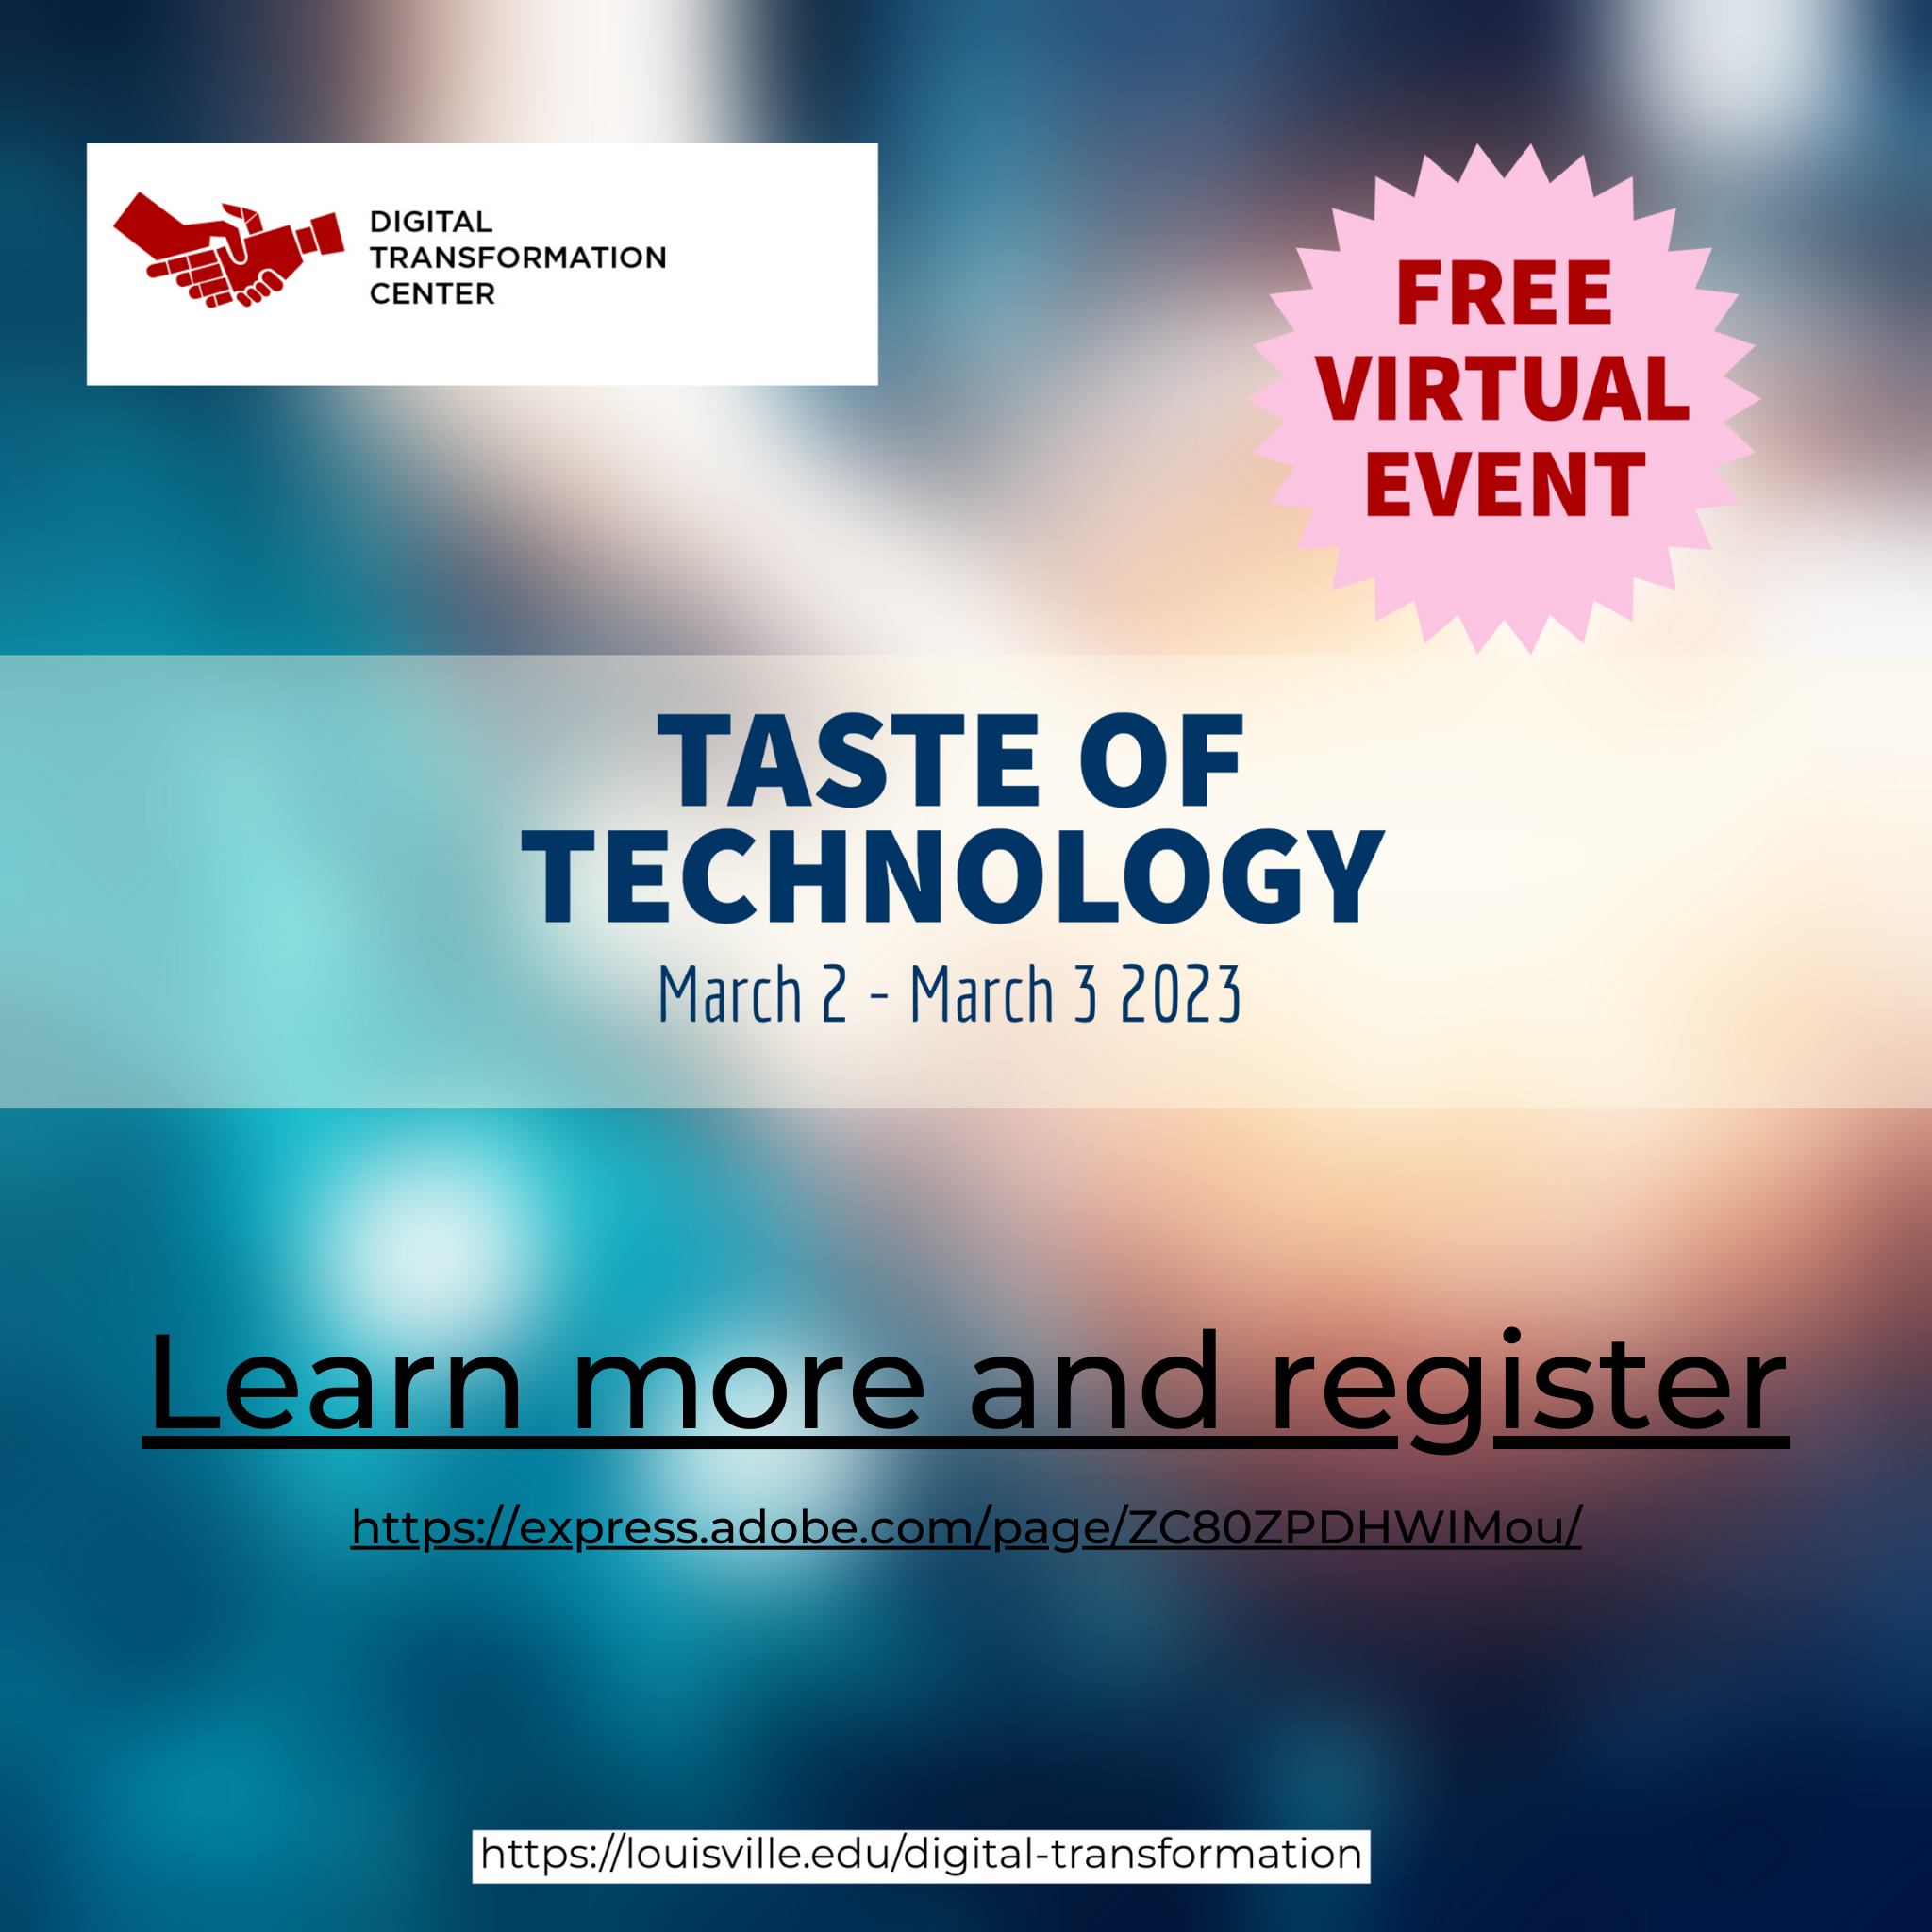 Free virtual event, Taste of Technology, March 2-3, 2023.  Learn more and register at the link